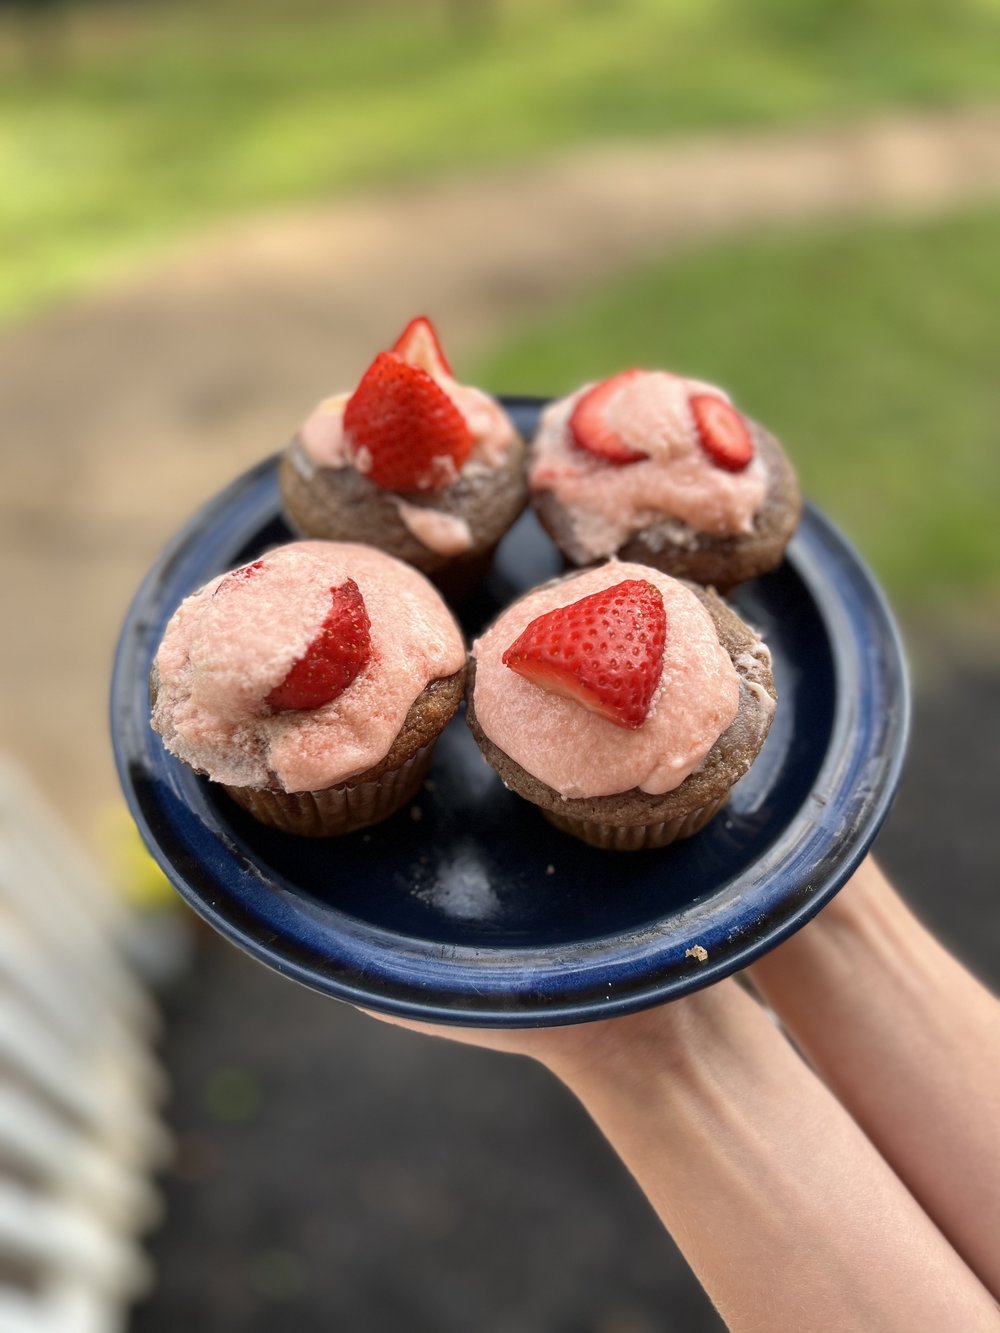 Homemade Strawberry Cupcakes by Alec (10-17 Age Division)